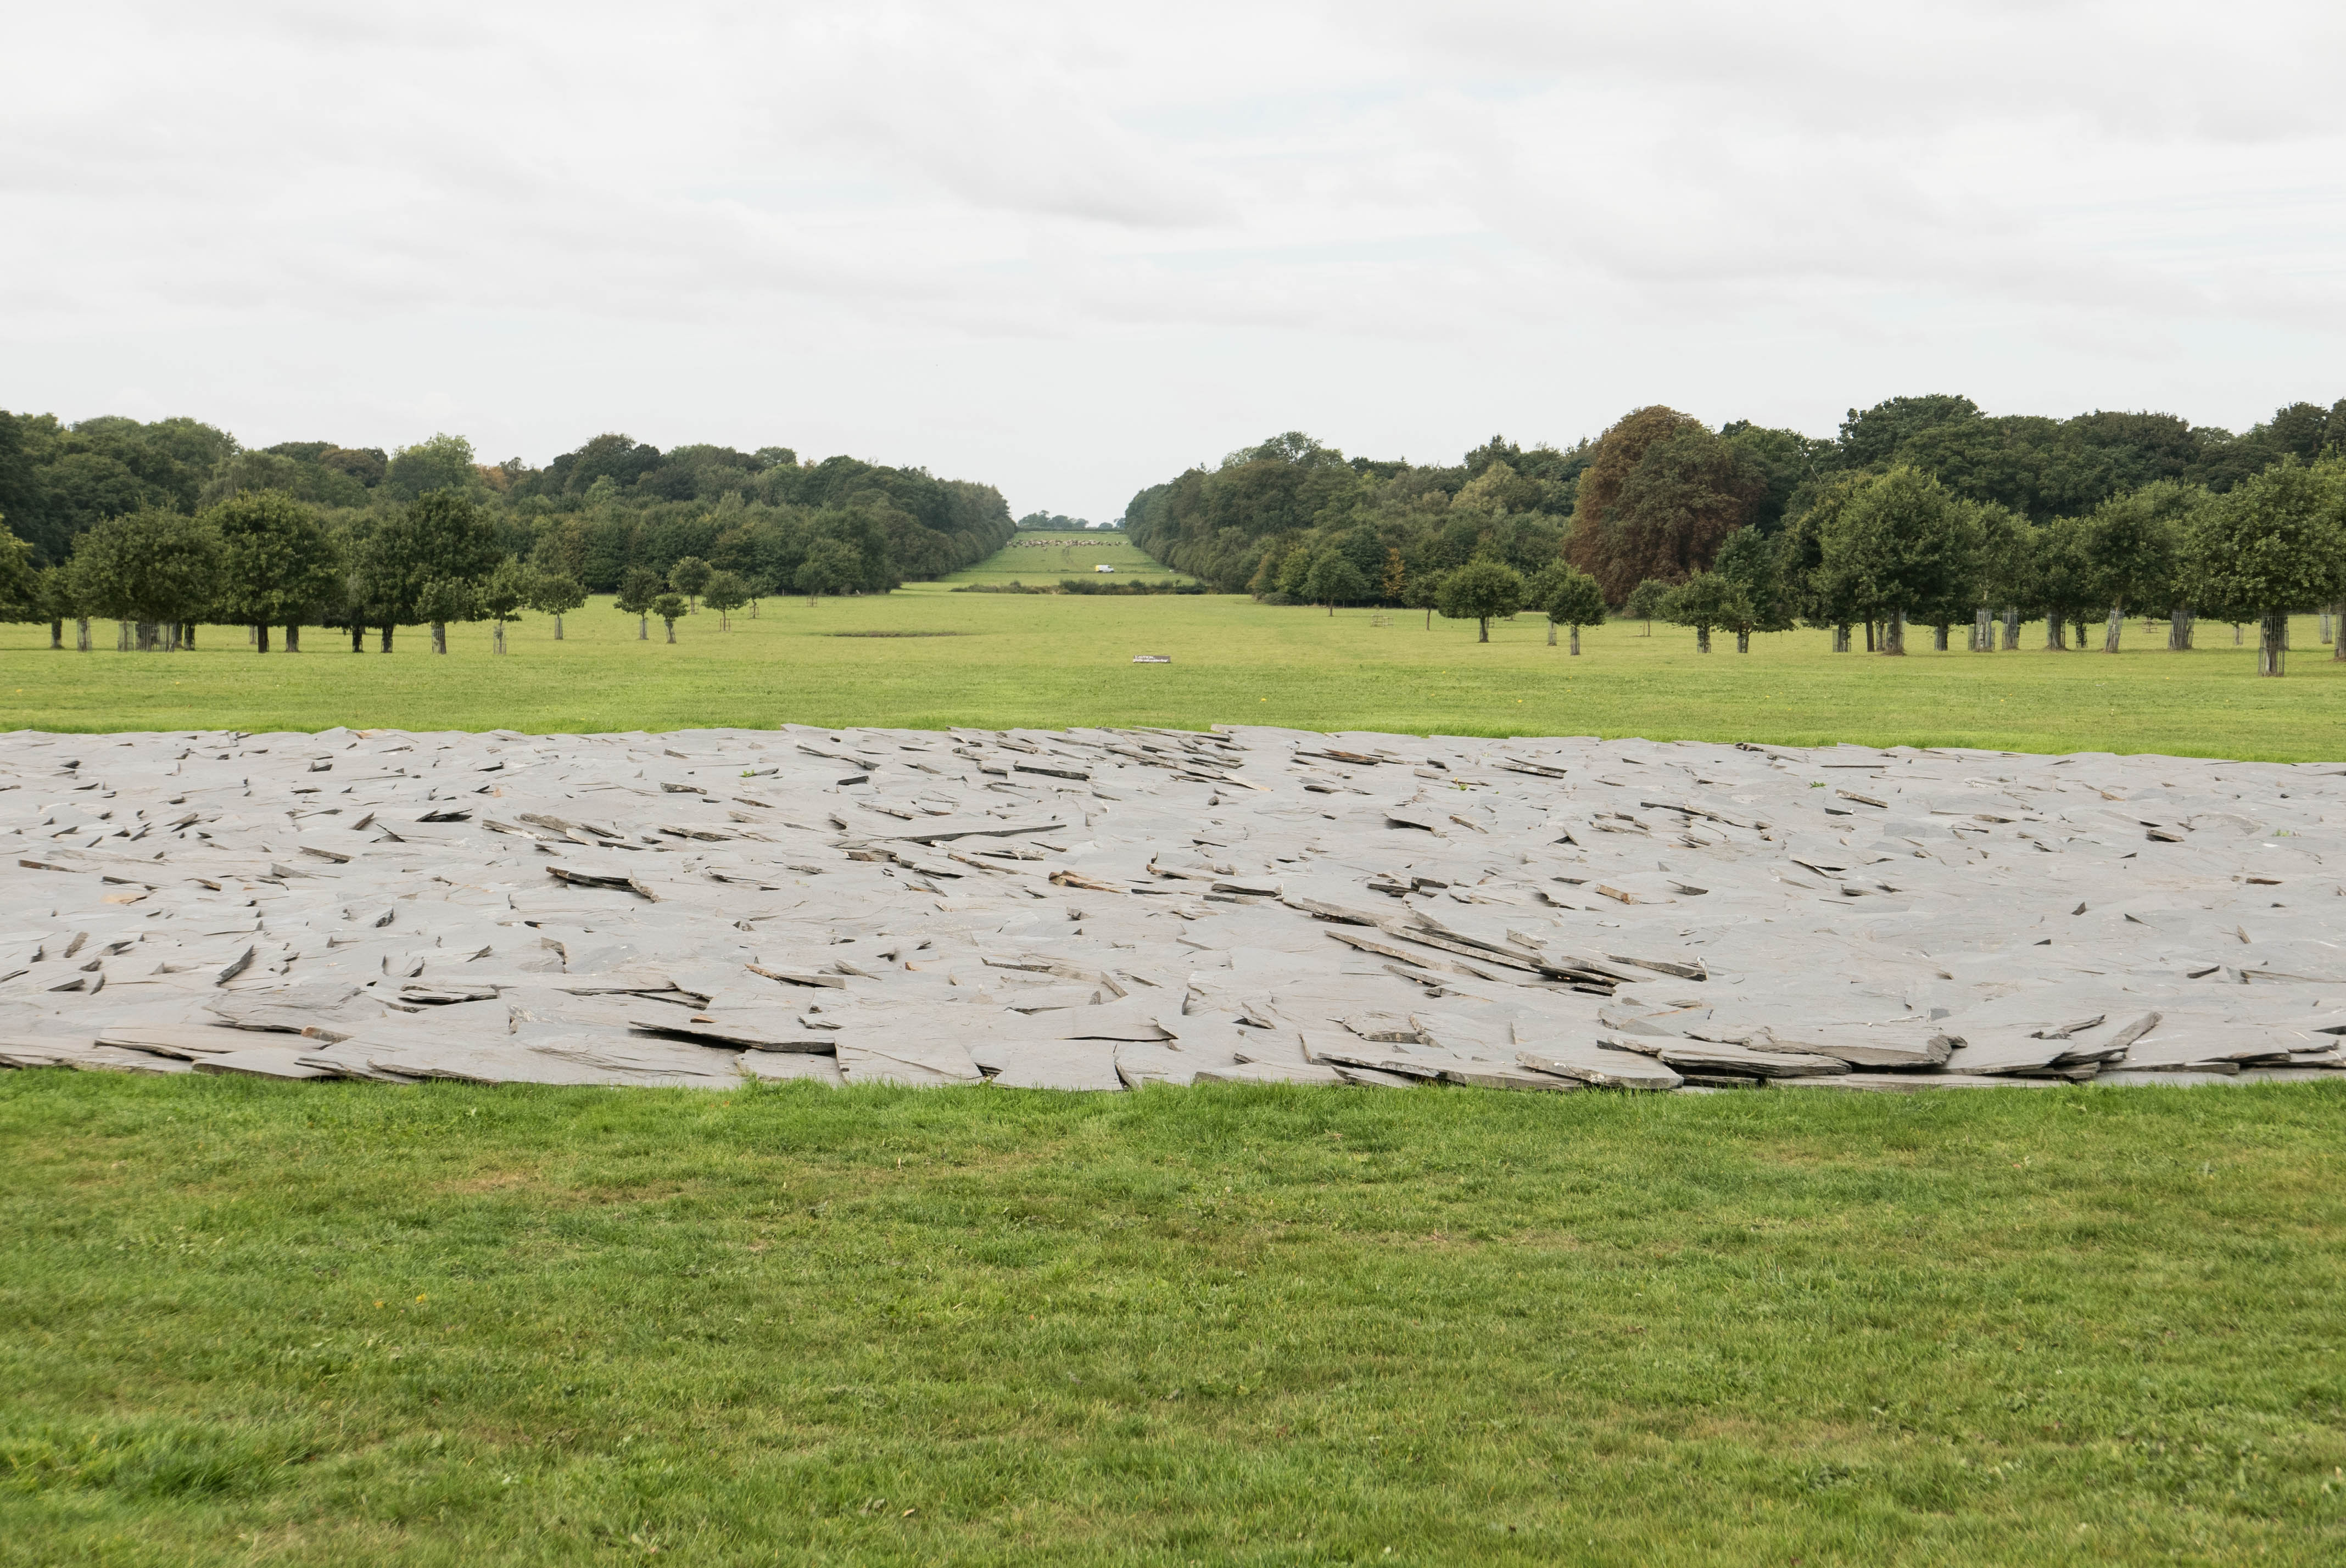 Another sculpture by Richard Long, titled "